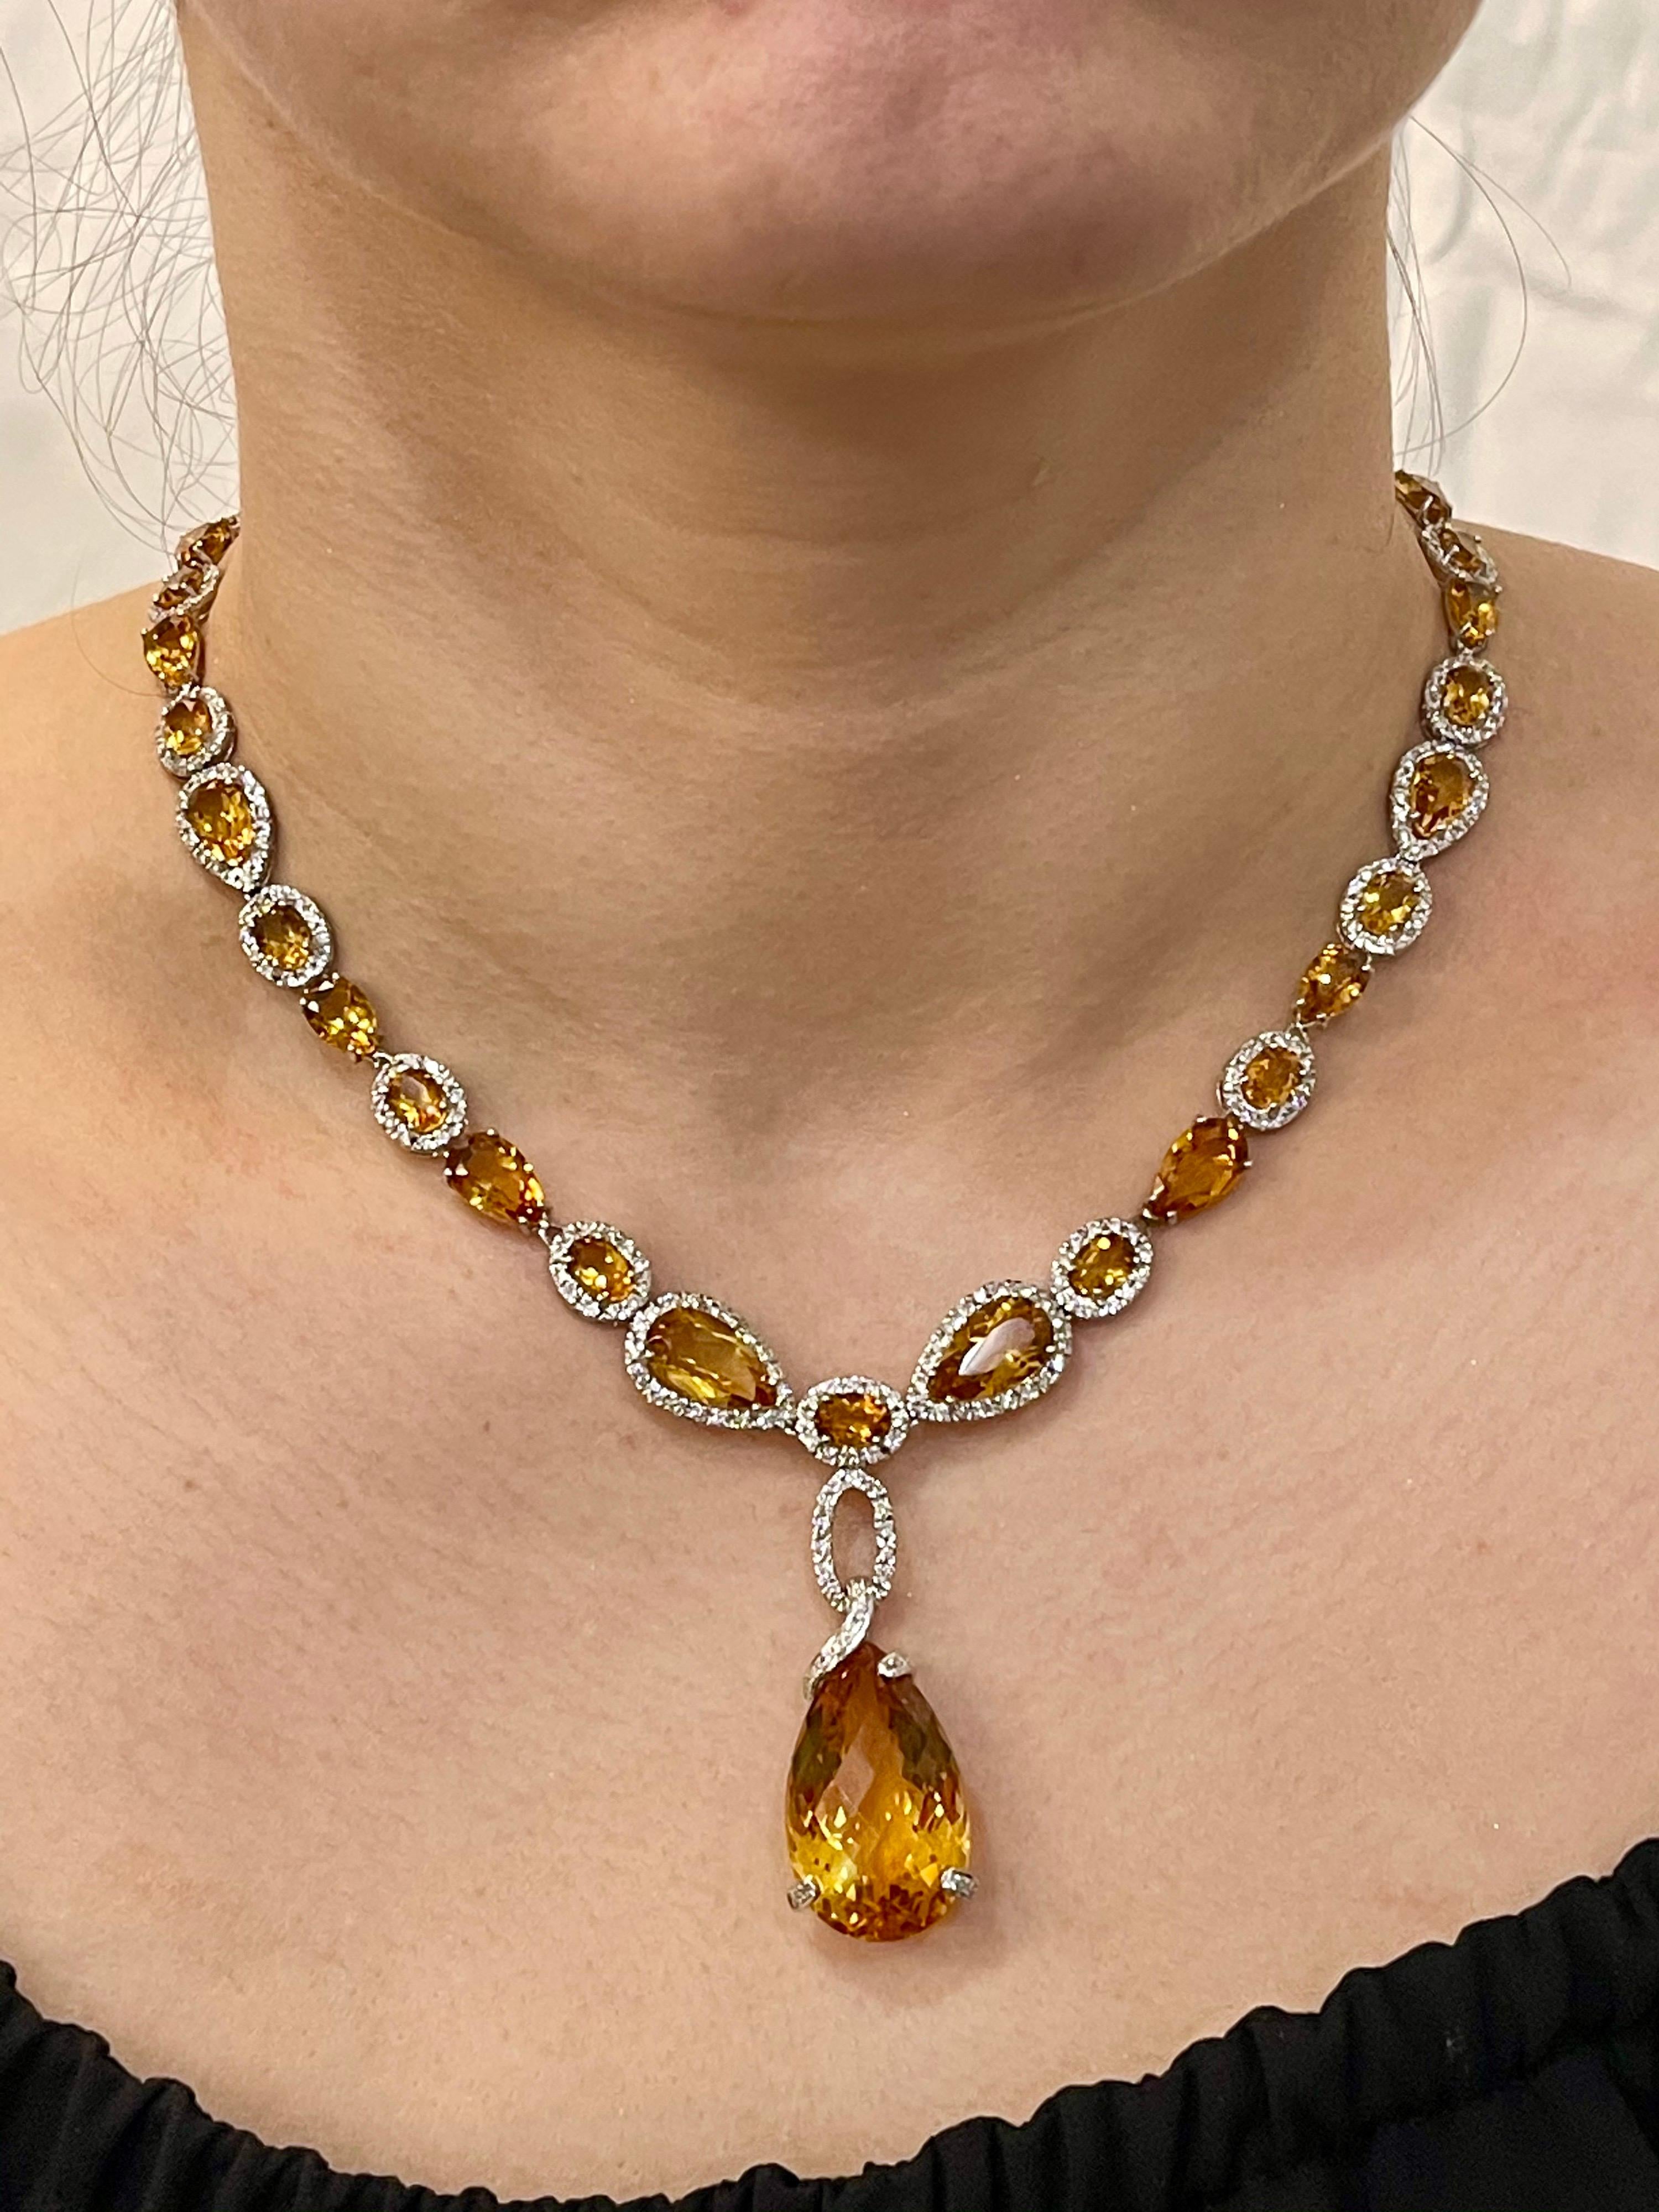 70 Carat Oval and Pear Citrine and 10 Carat Diamonds Necklace 18 Karat Gold For Sale 4